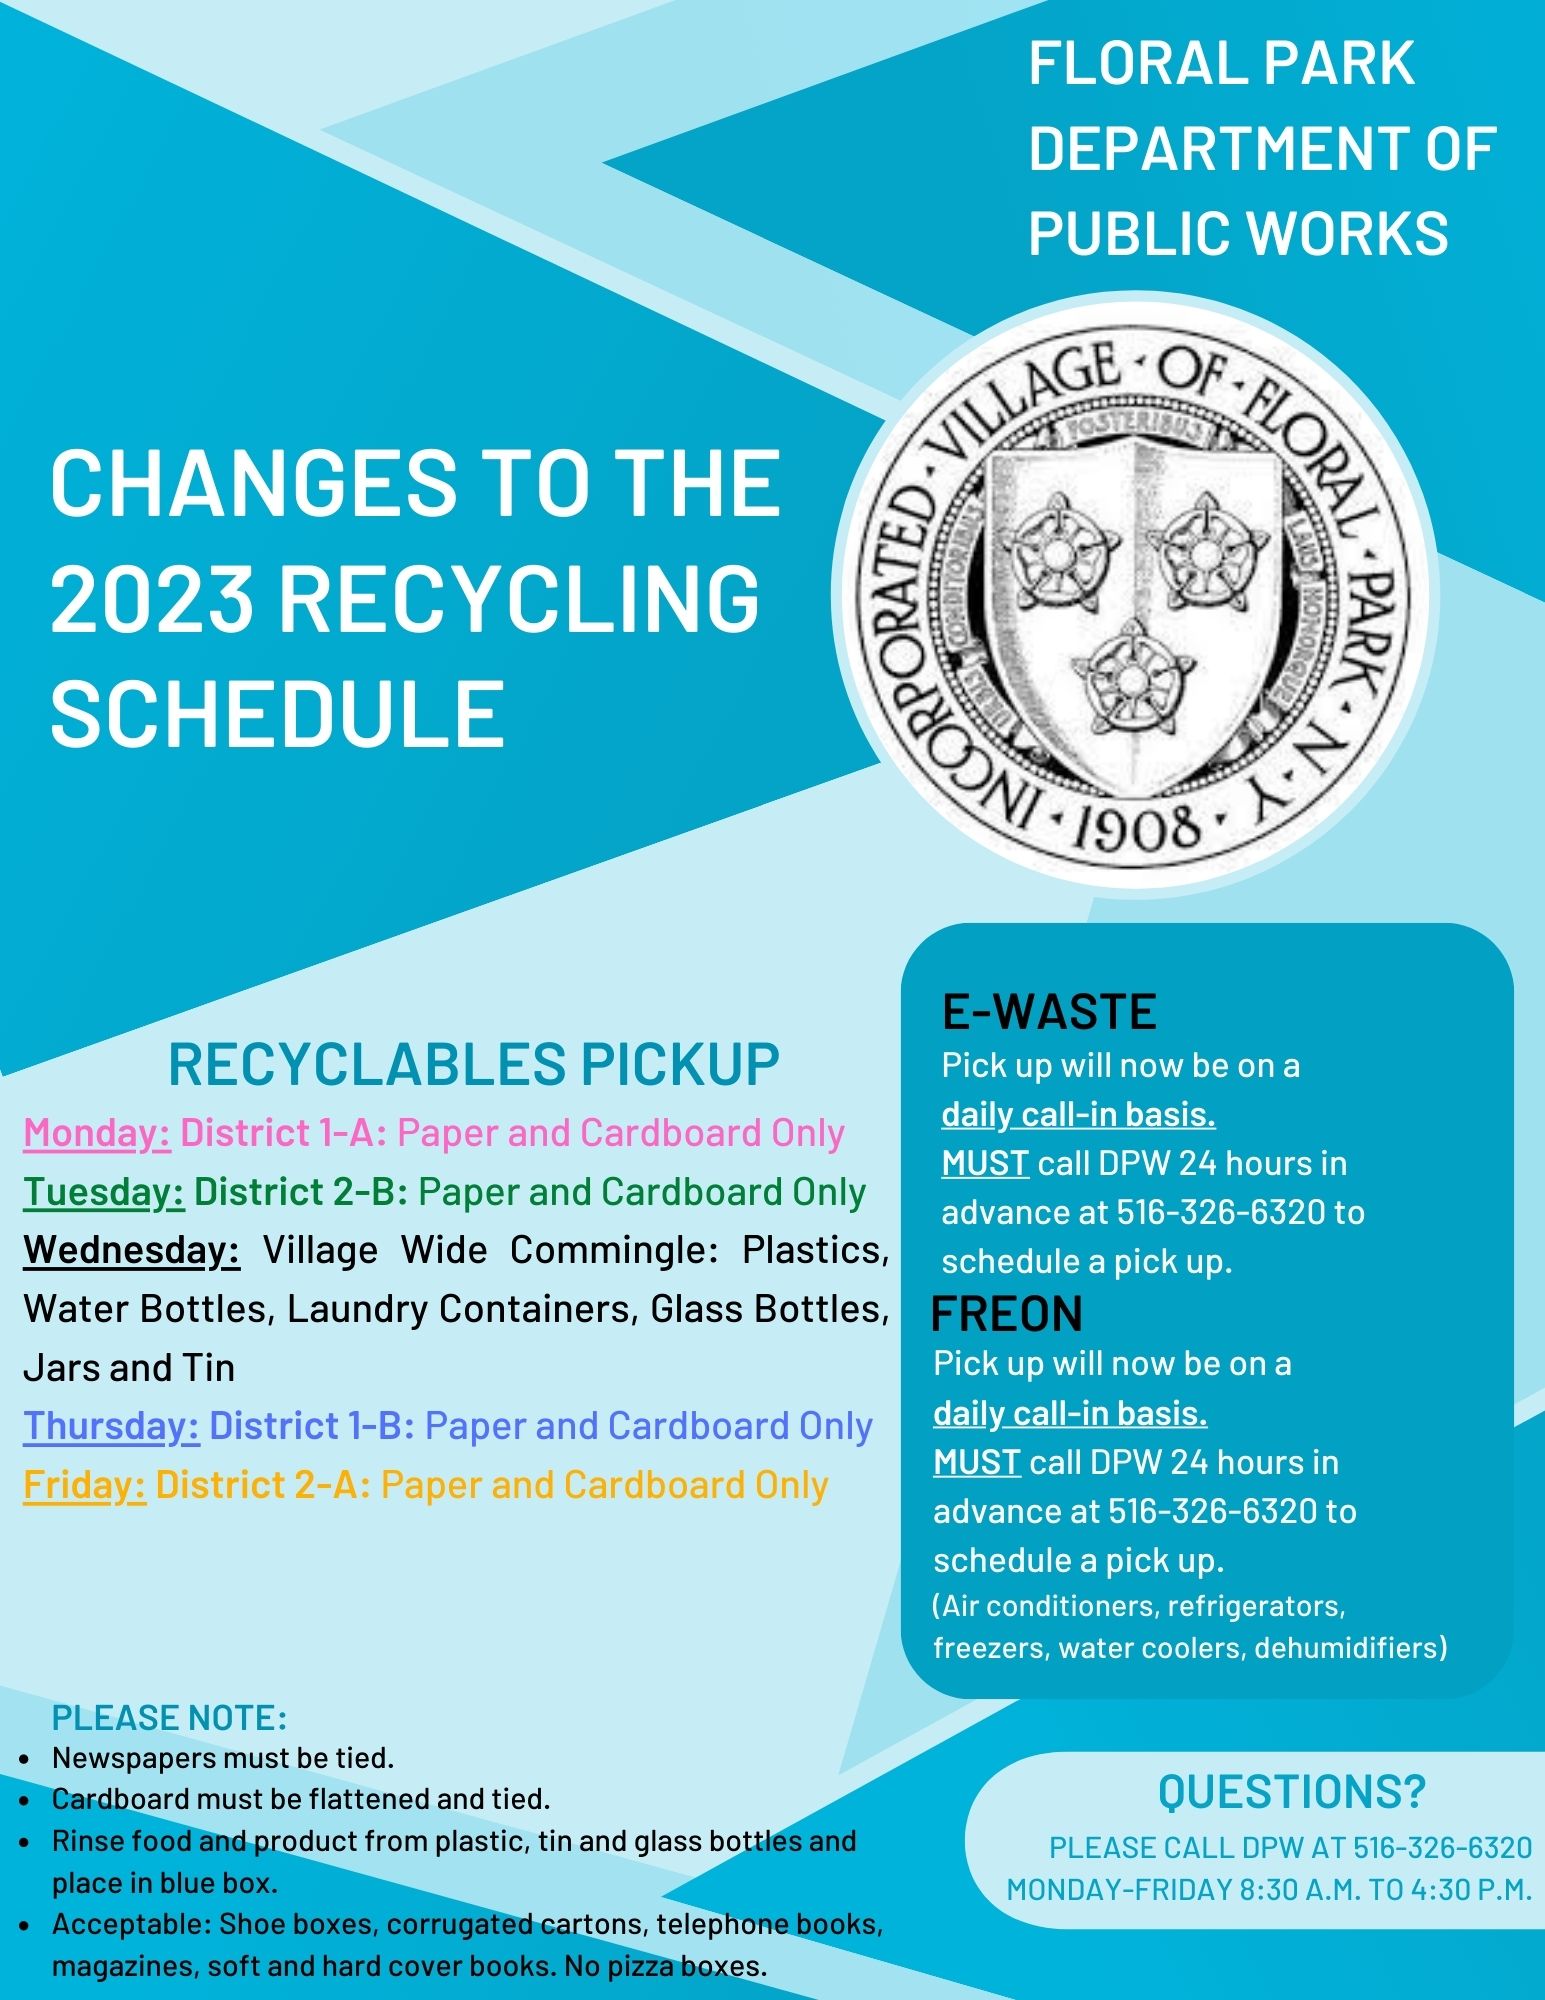 <strong>Changes to the 2023 Recycling Schedule</strong>